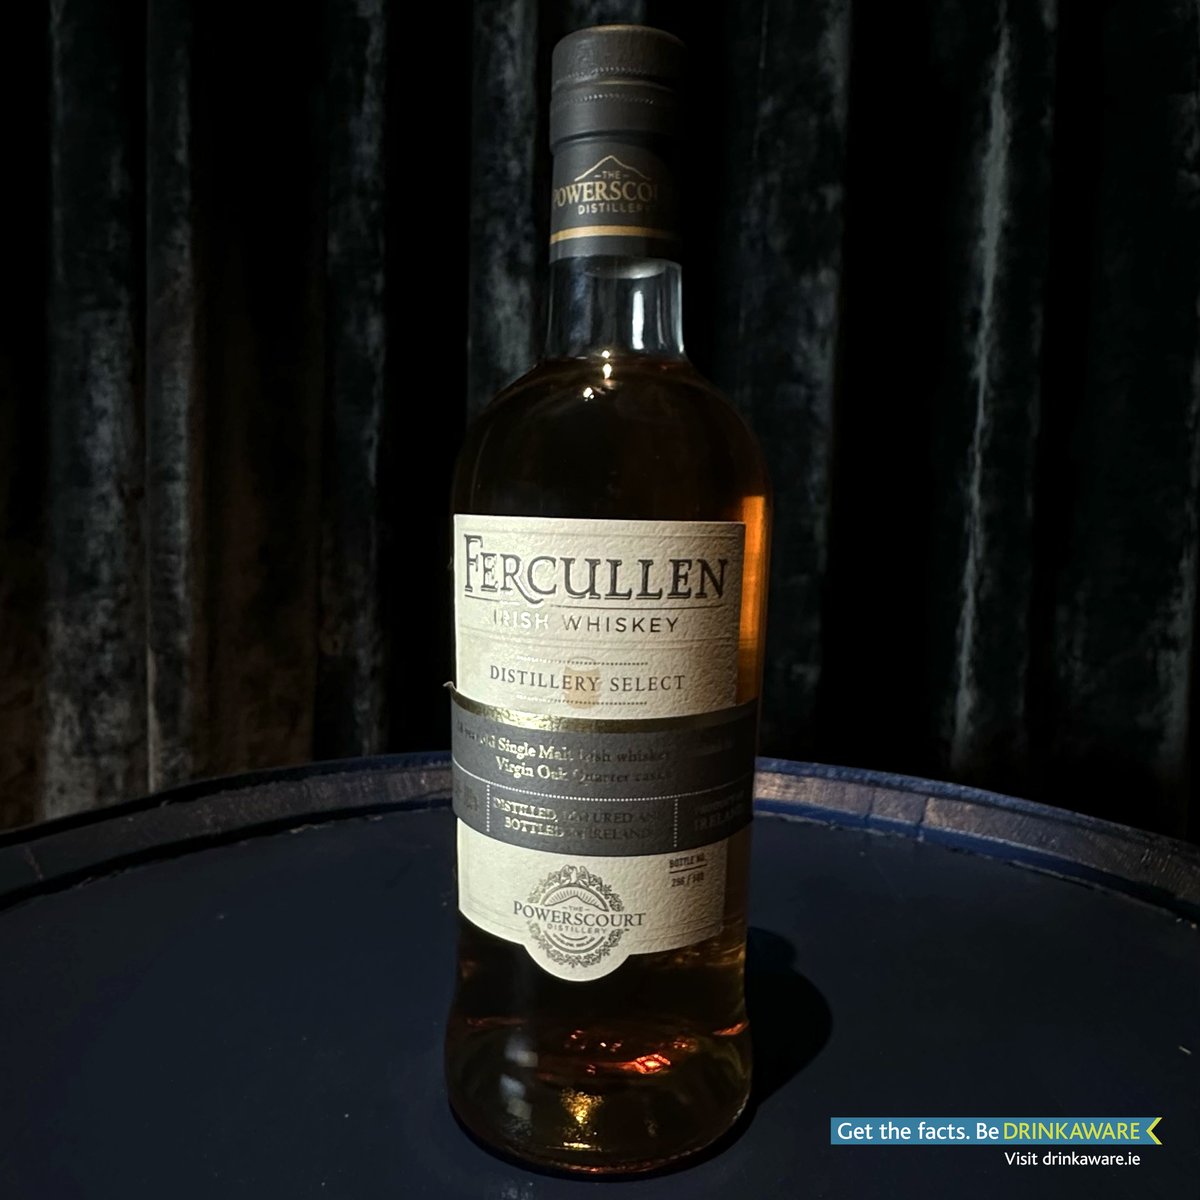 Savour the taste of Fercullen Distillery Select, a marriage of four Virgin American Oak Casks reduced to 46% ABV 🥃 Have you tried our Distillery exclusives yet? powerscourtdistillery.com/product/distil… #FercullenWhiskey #SingleMalt #IrishWhiskey